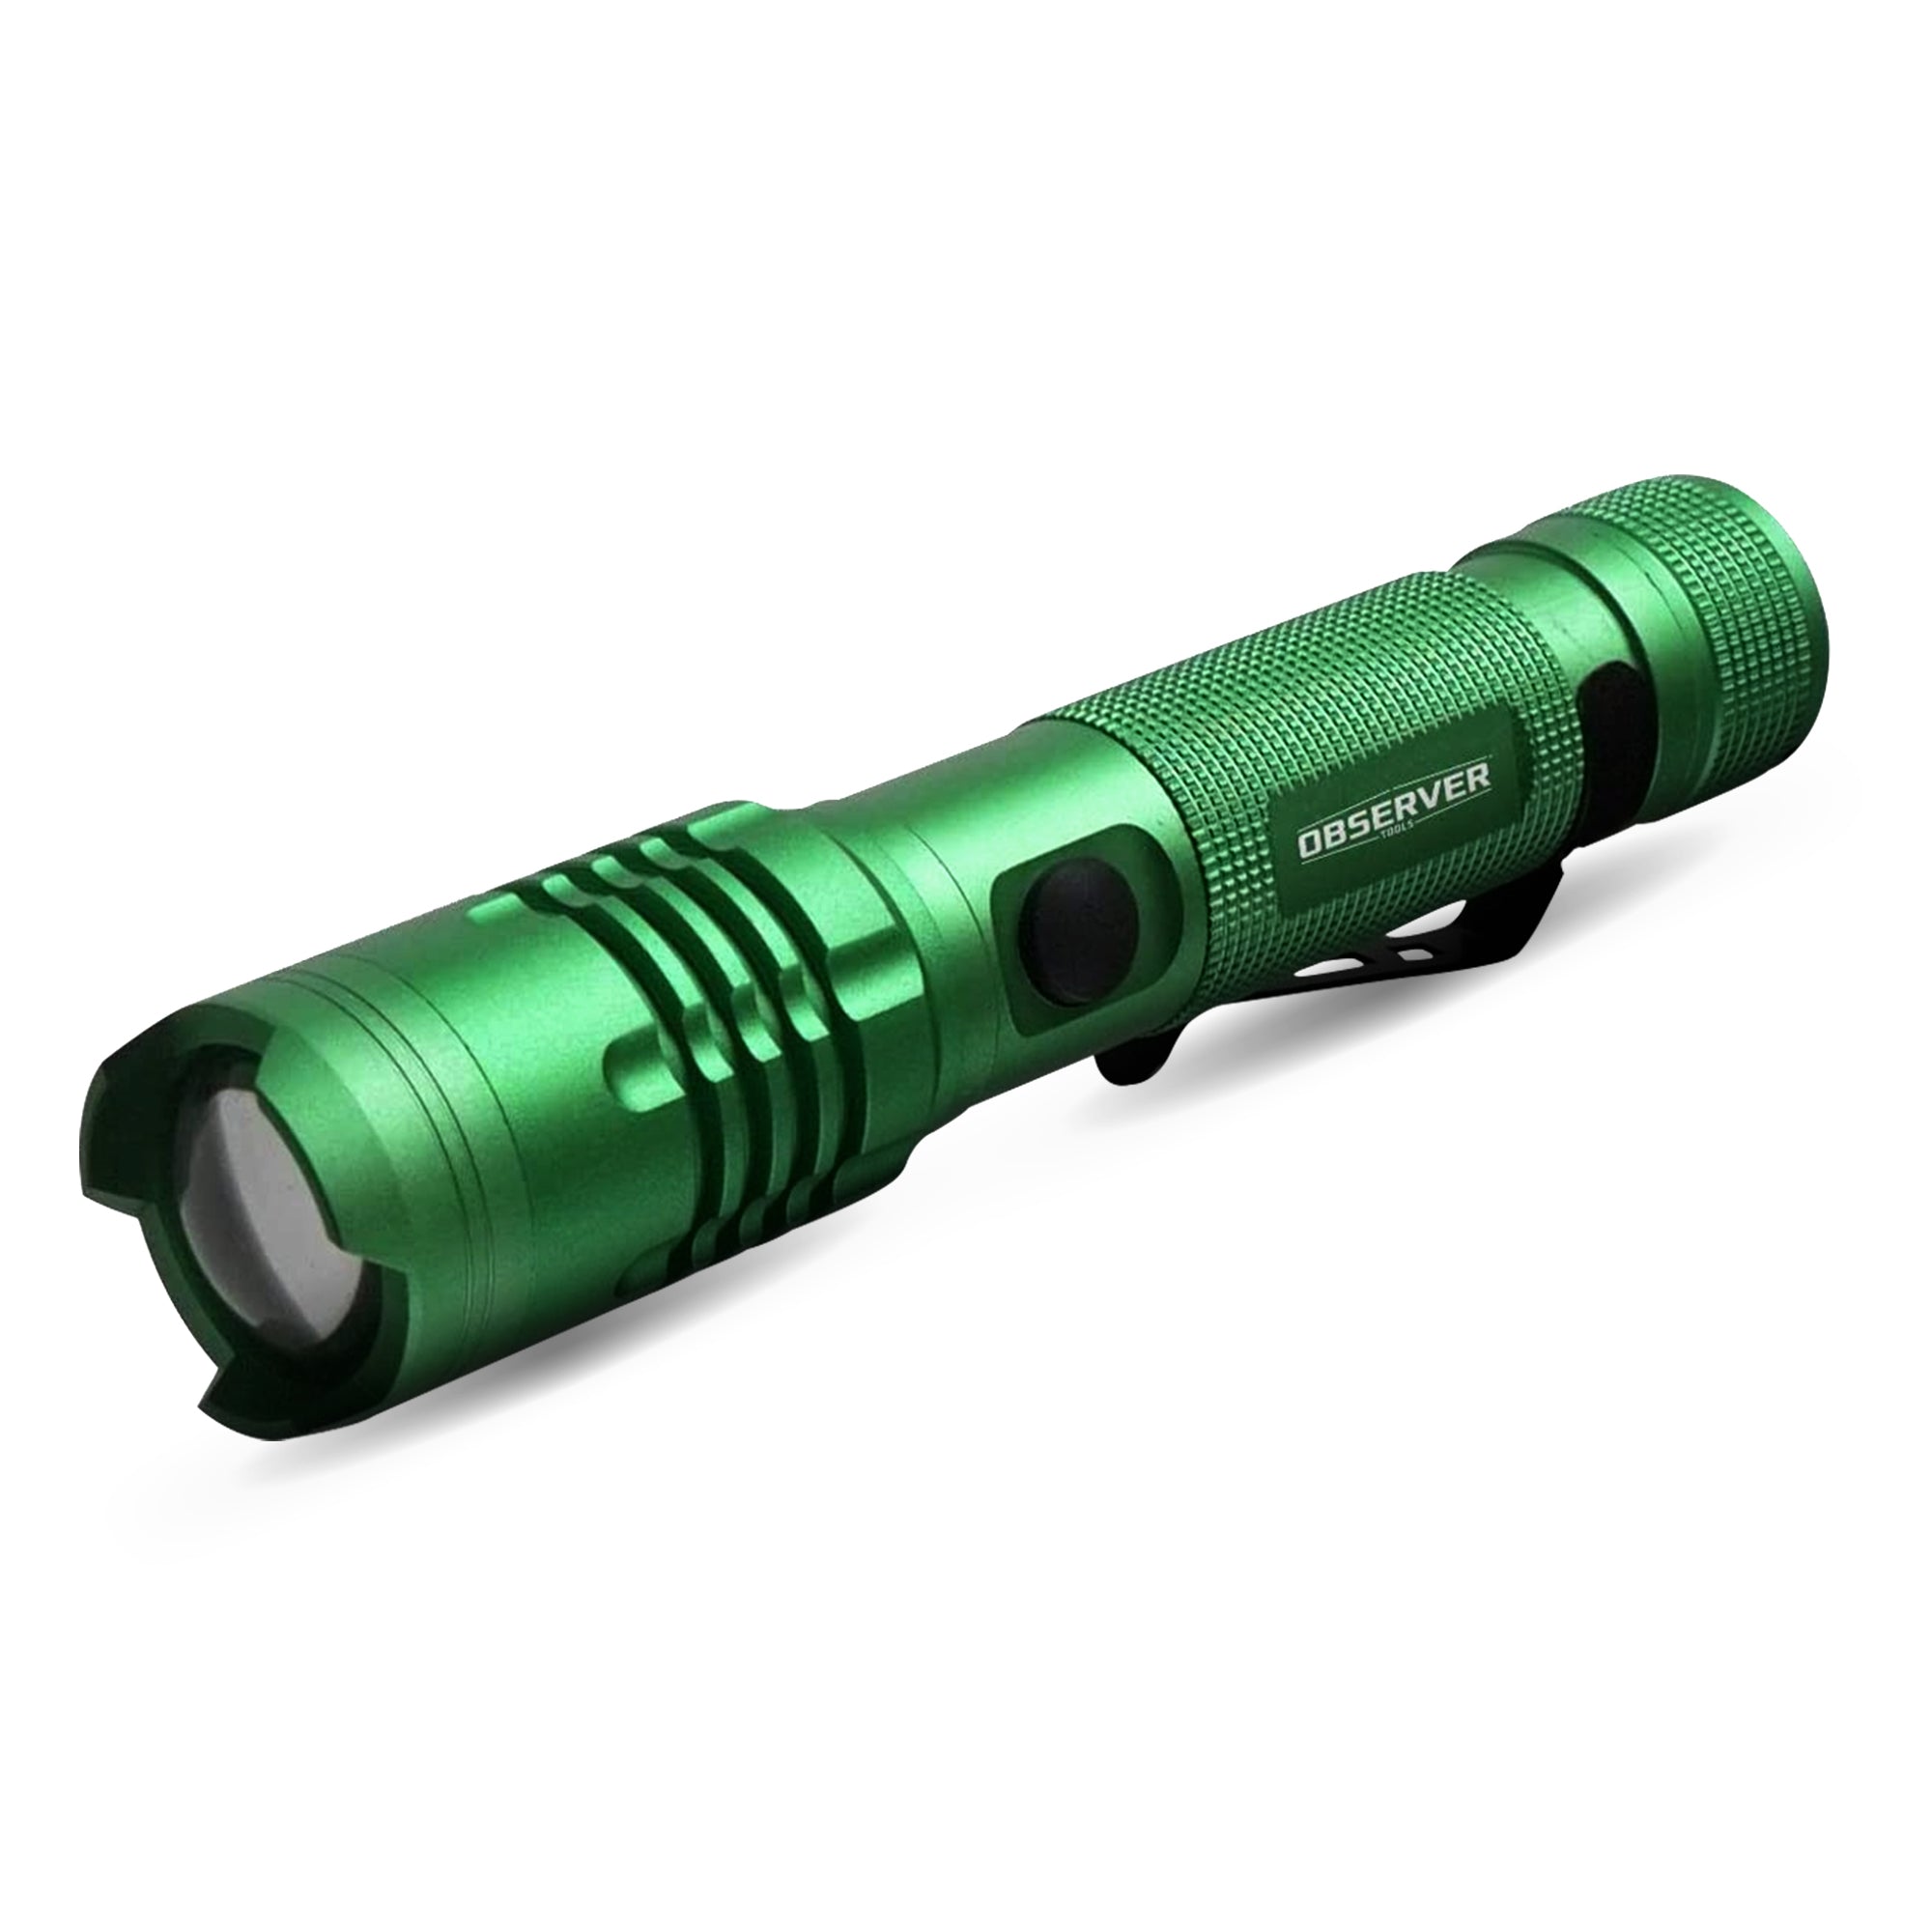 Bundle-B of 1200 Lumen Tactical LED Rechargeable Flashlight with Power Bank & Dual Power